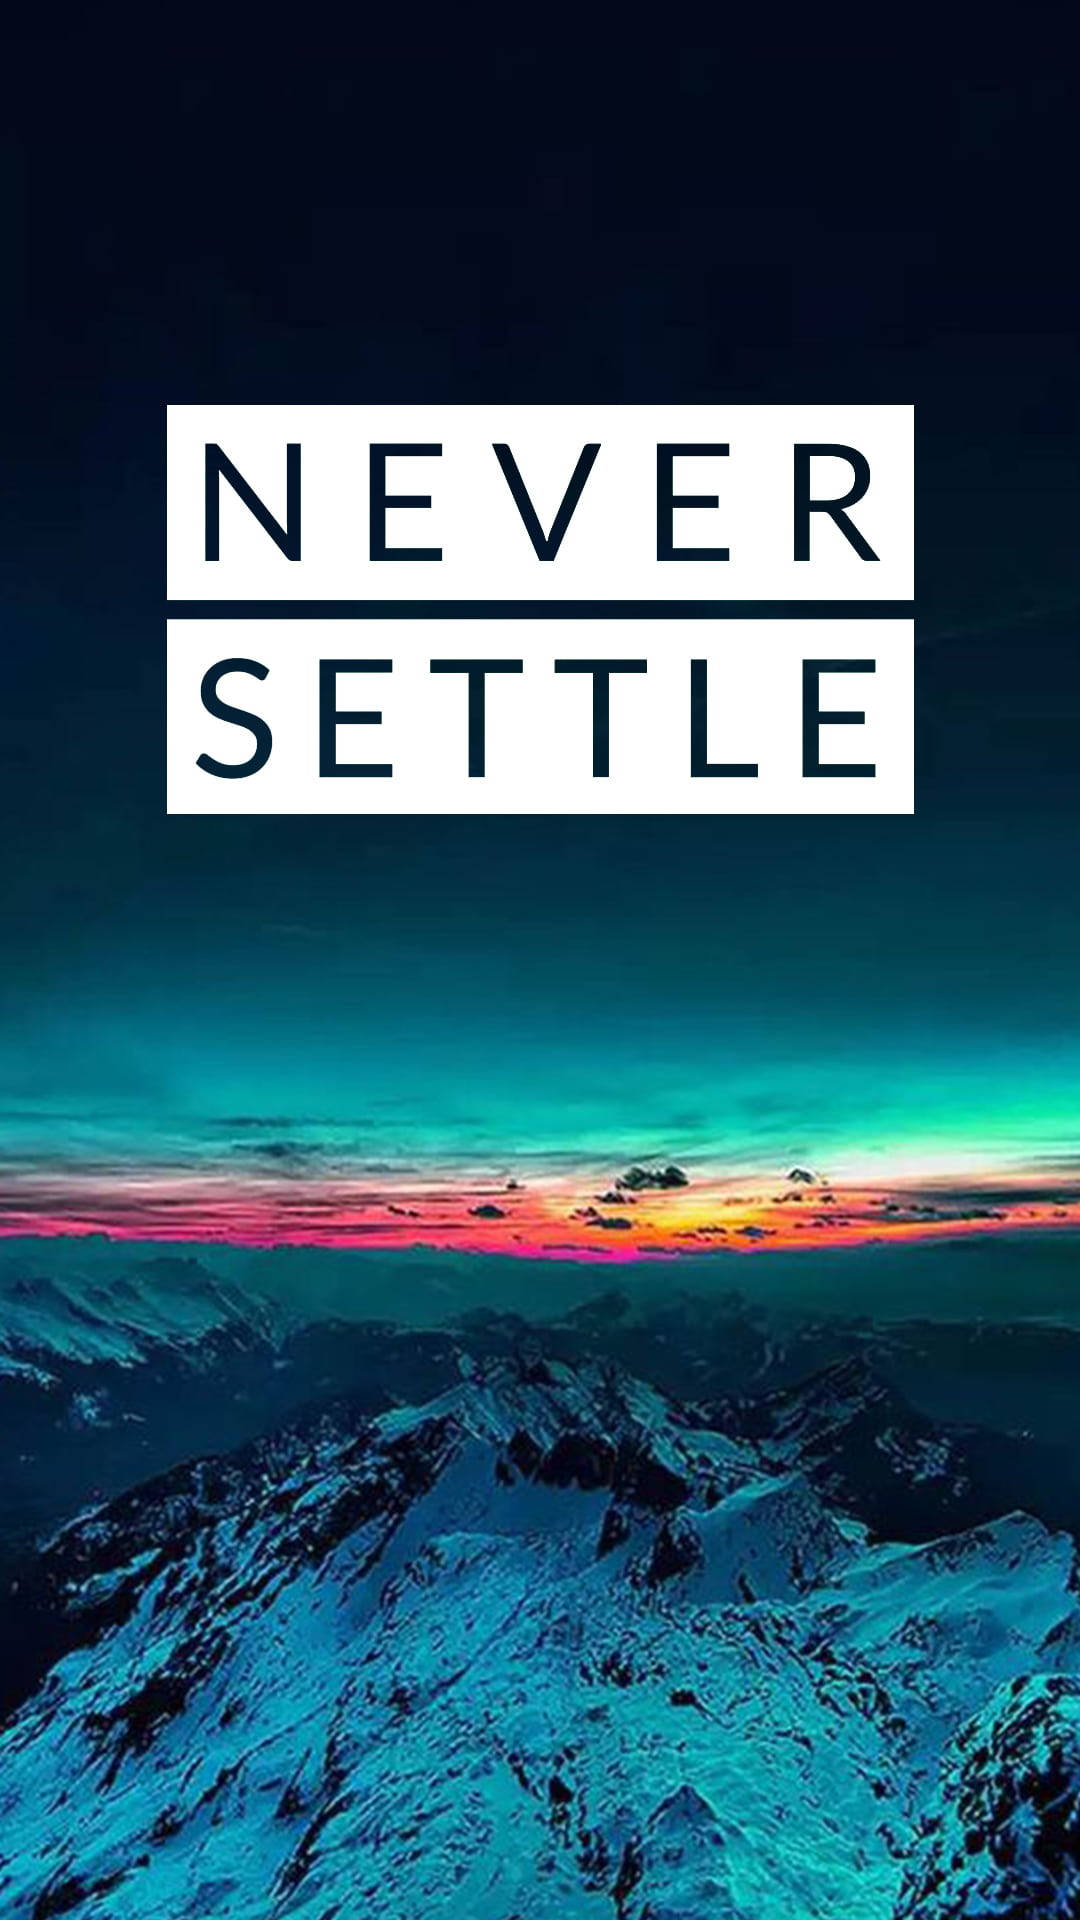 Oneplus Nord Never Setter Mountain View Background